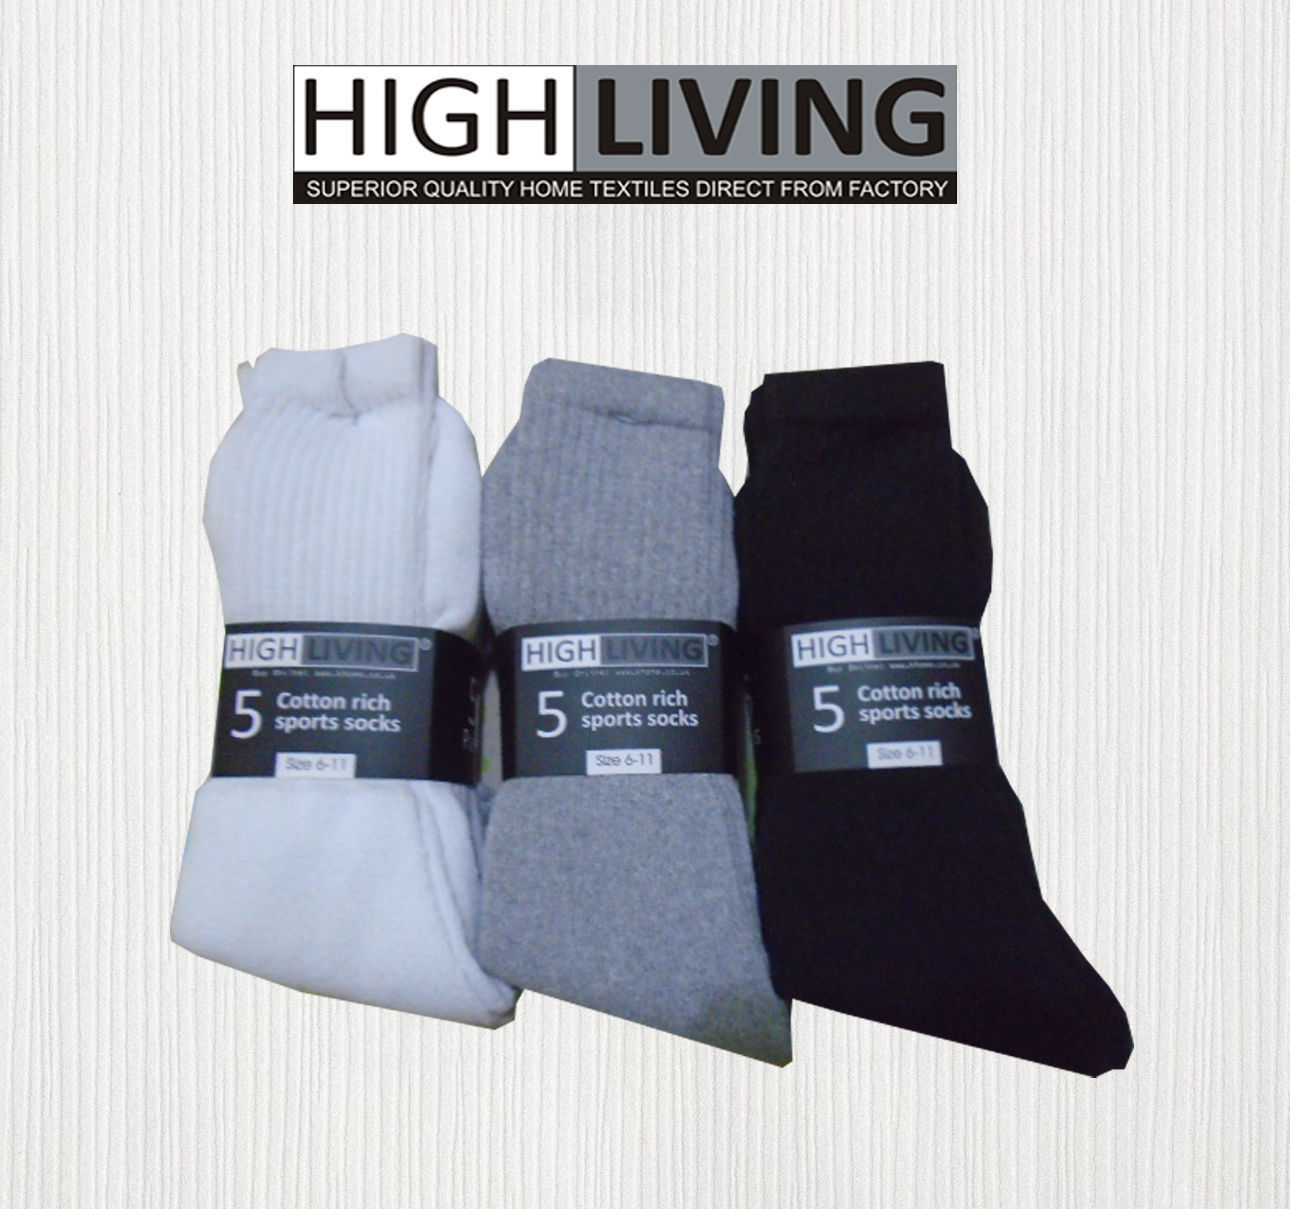 15 Pairs of Mens Sport Socks Cushion Sole Black White Grey Cotton Rich Size 6-11